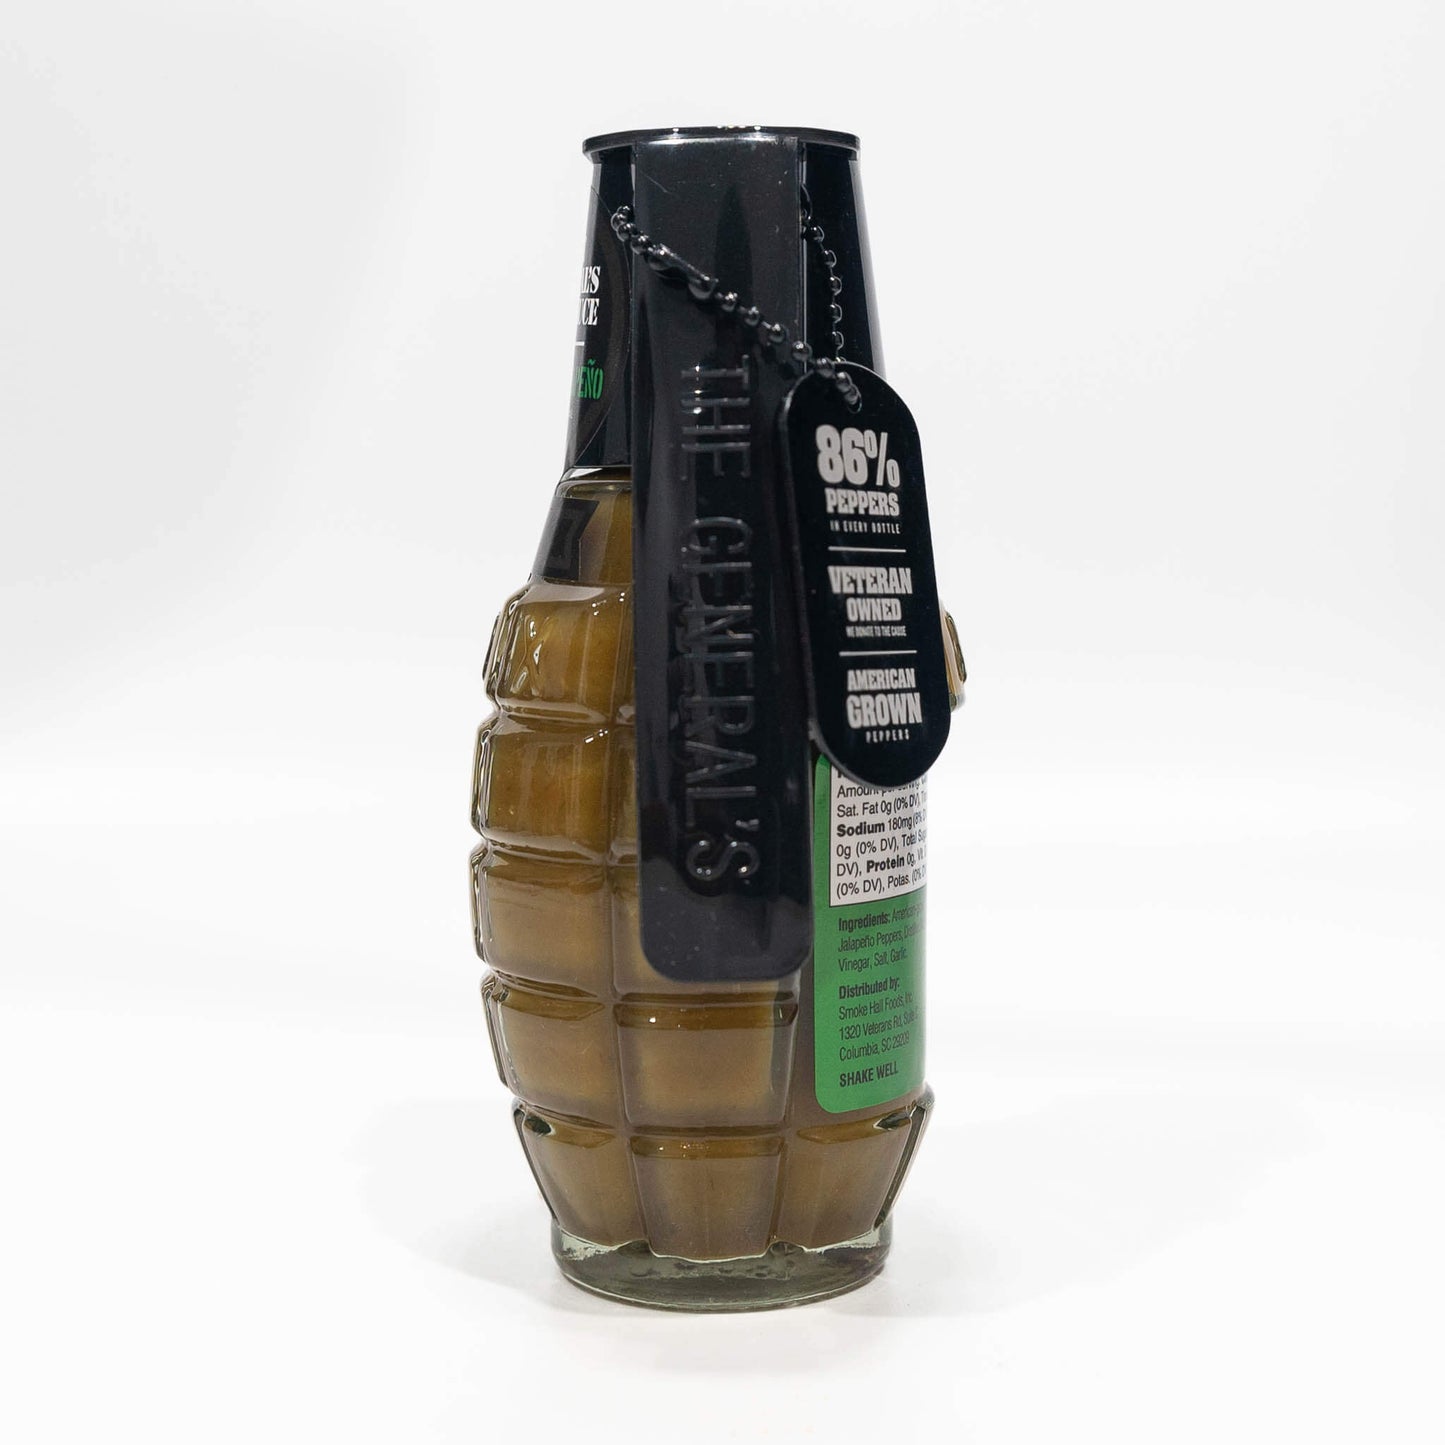 Side view of The General's Hooah Jalapeño hot sauce bottle, emphasizing the brand's commitment to using 86% peppers, being veteran owned, and American grown.